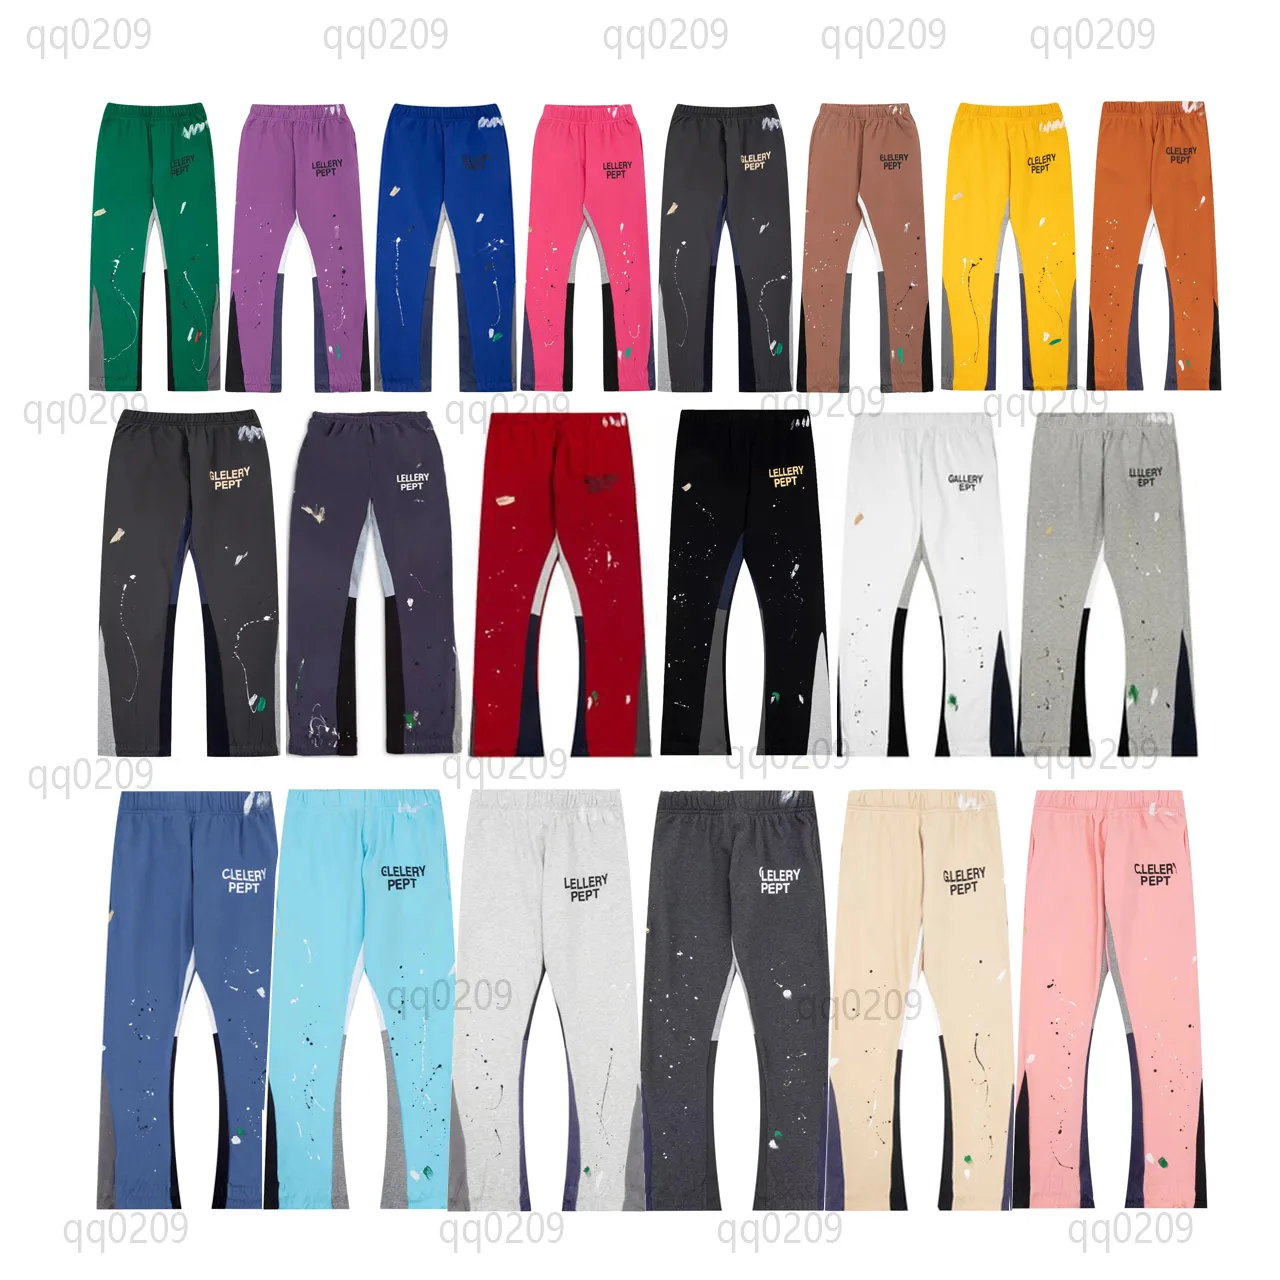 Men's Plus Size Sweatpants High Quality Padded Sweat Pants for Cold Weather Winter Men Jogger Pants Casual Quantity Waterproof Cotton e2wwW